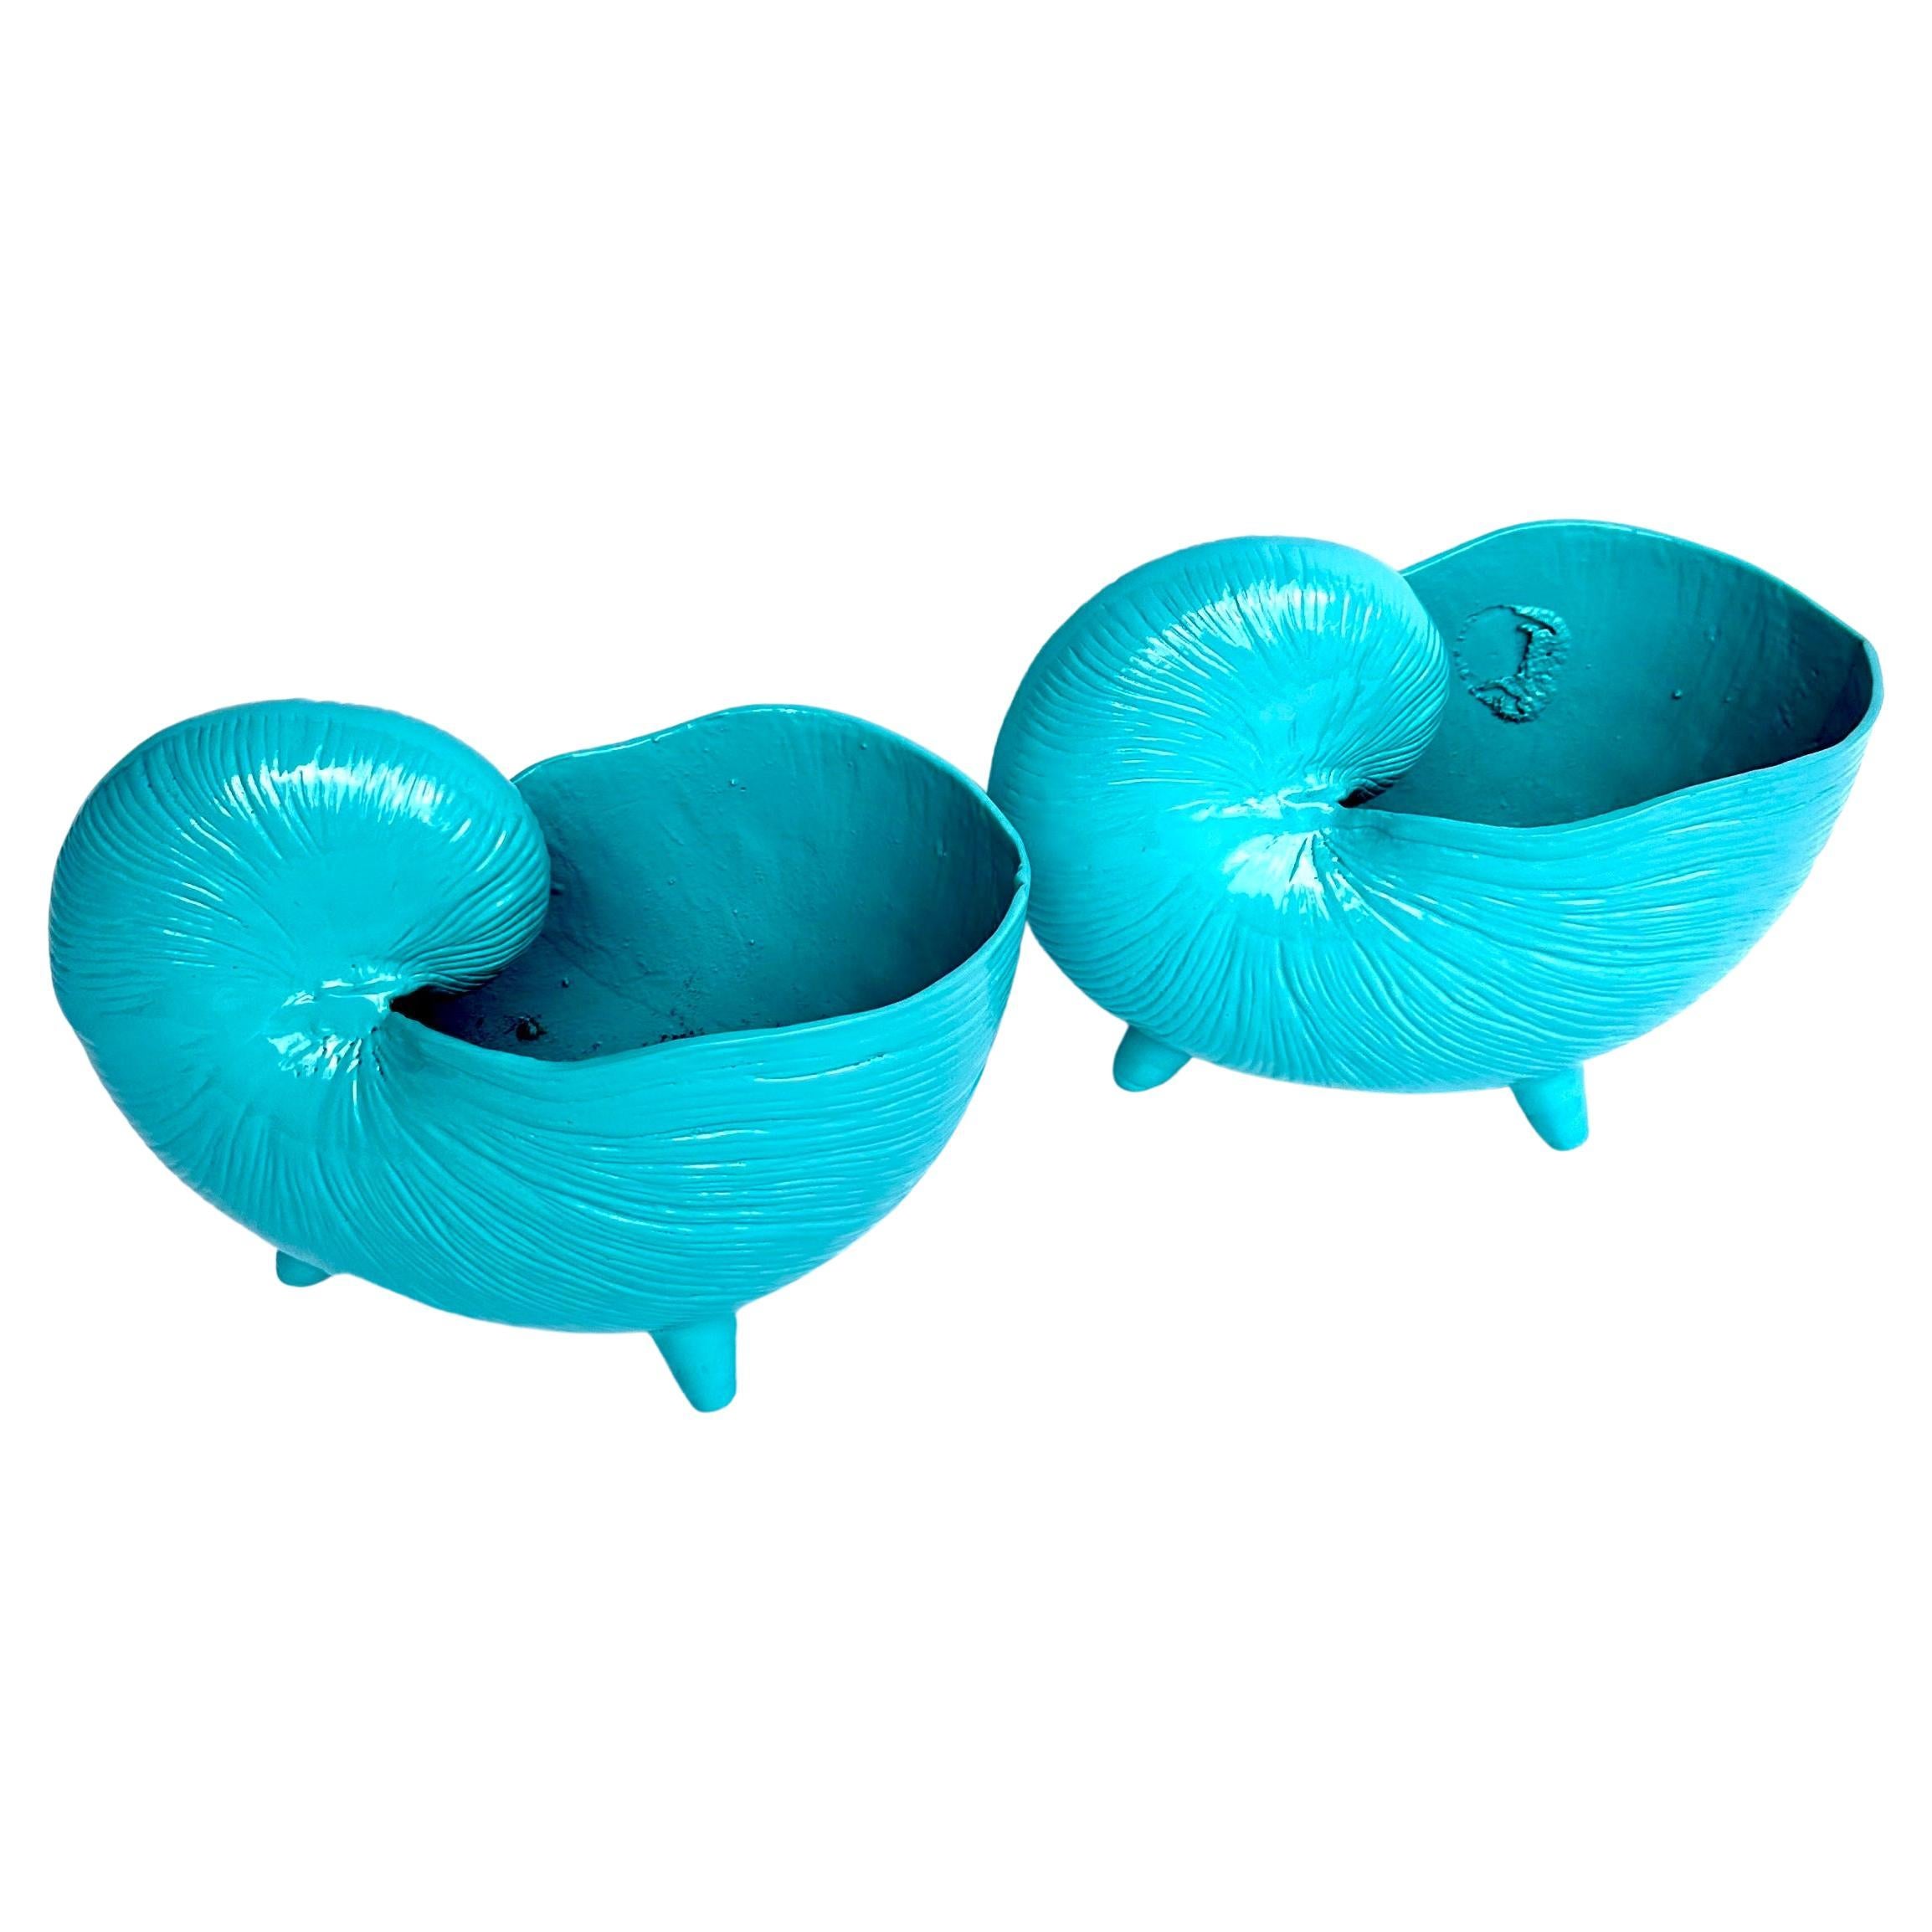 Hand-Crafted Vintage Pair of Nautilus Planters or Jardinières, Blue Powder-Coated  For Sale